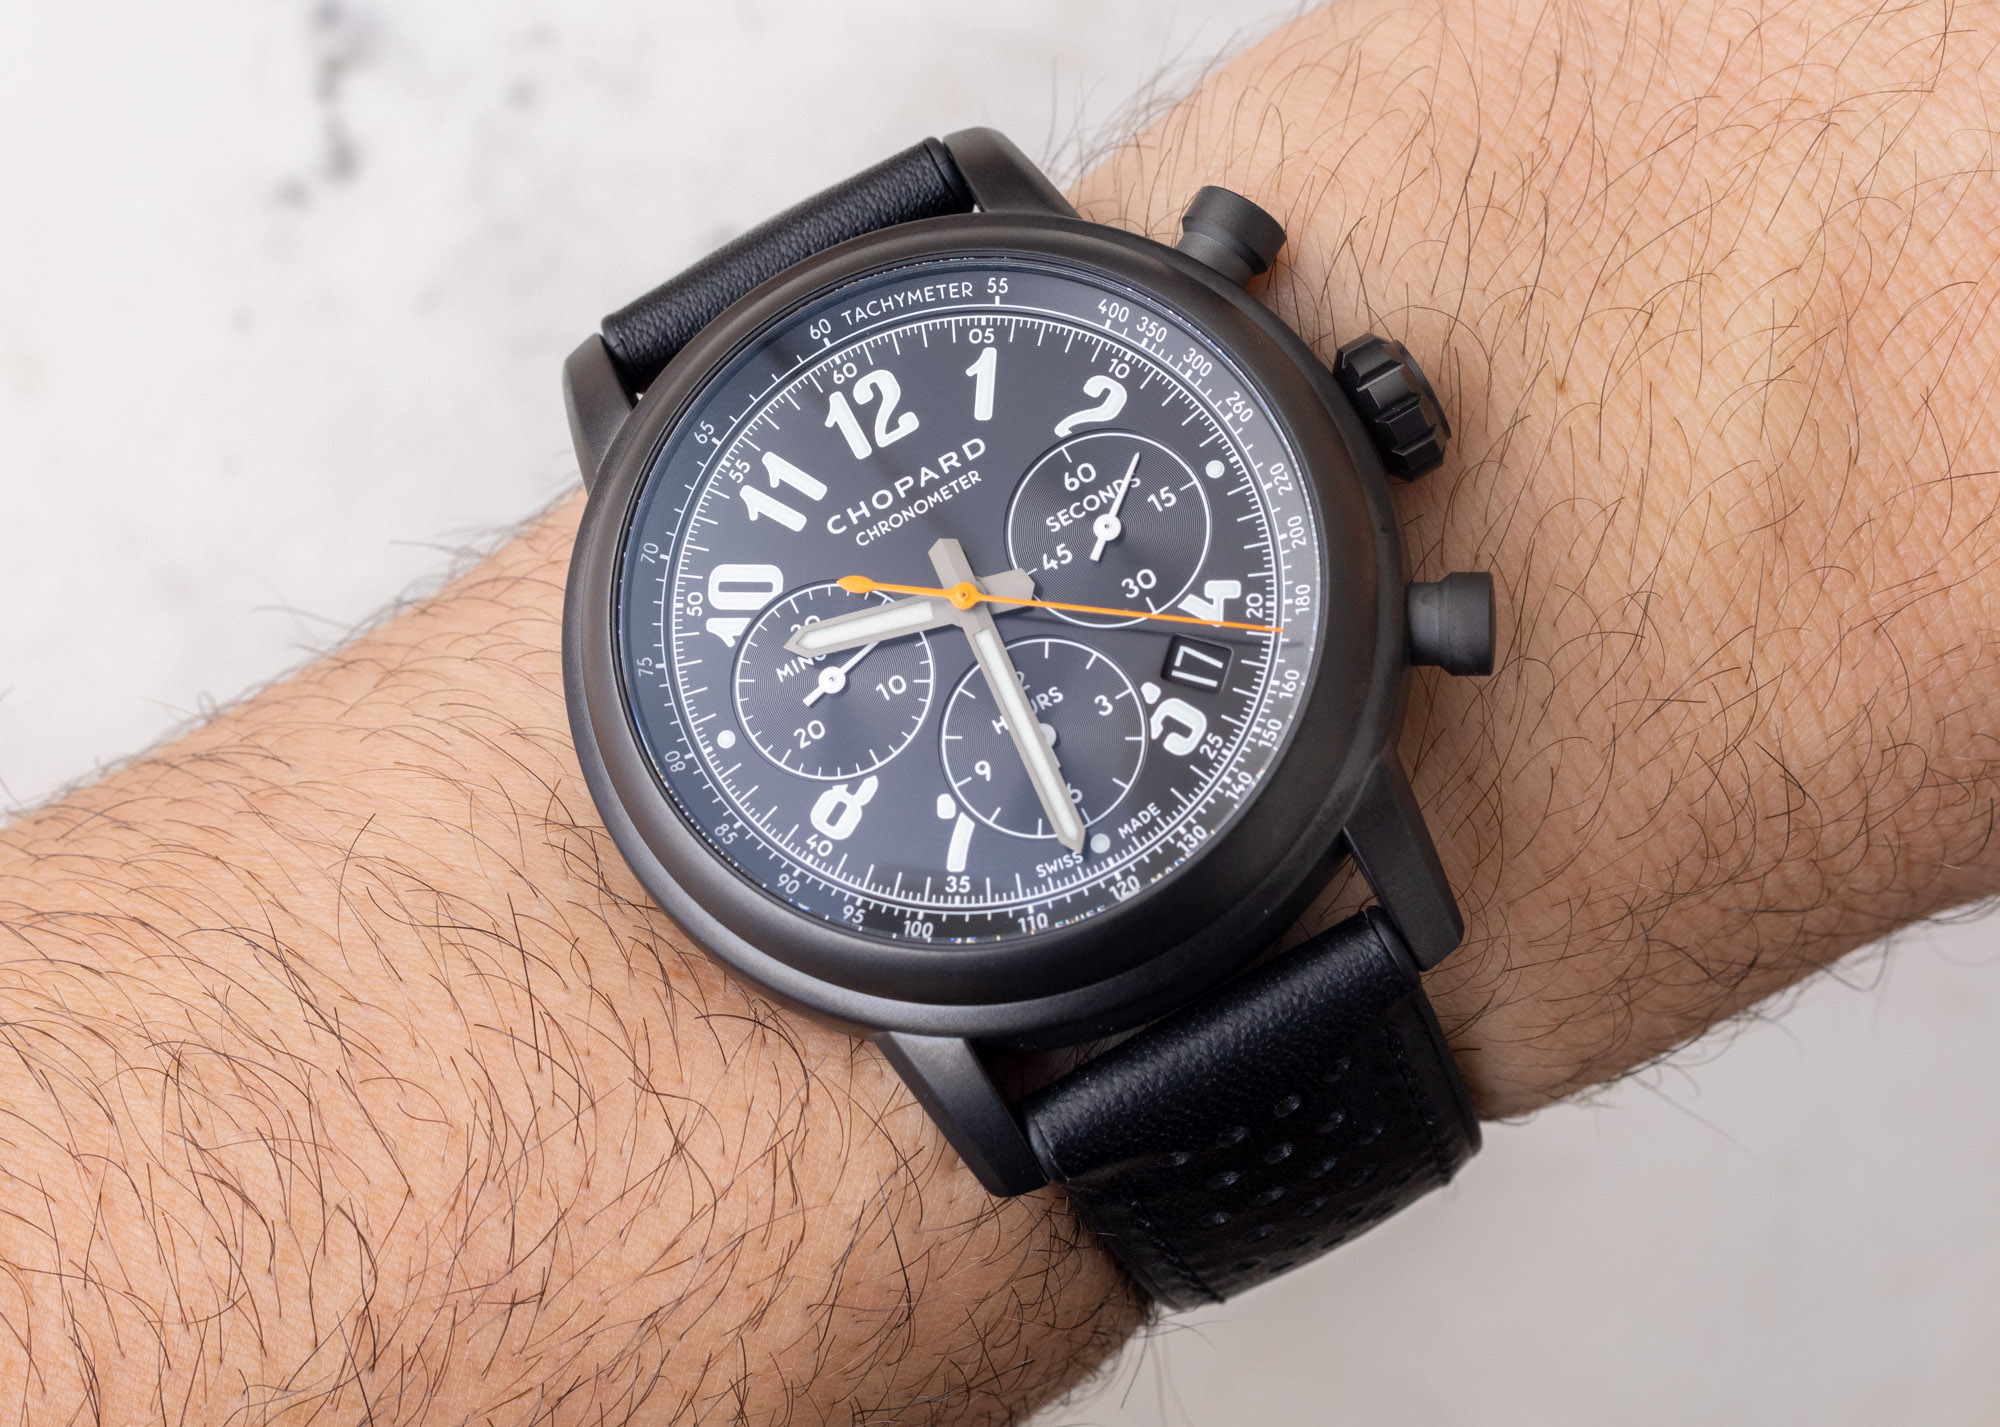 Watch Review: Testing The Chopard Mille Miglia Chronograph